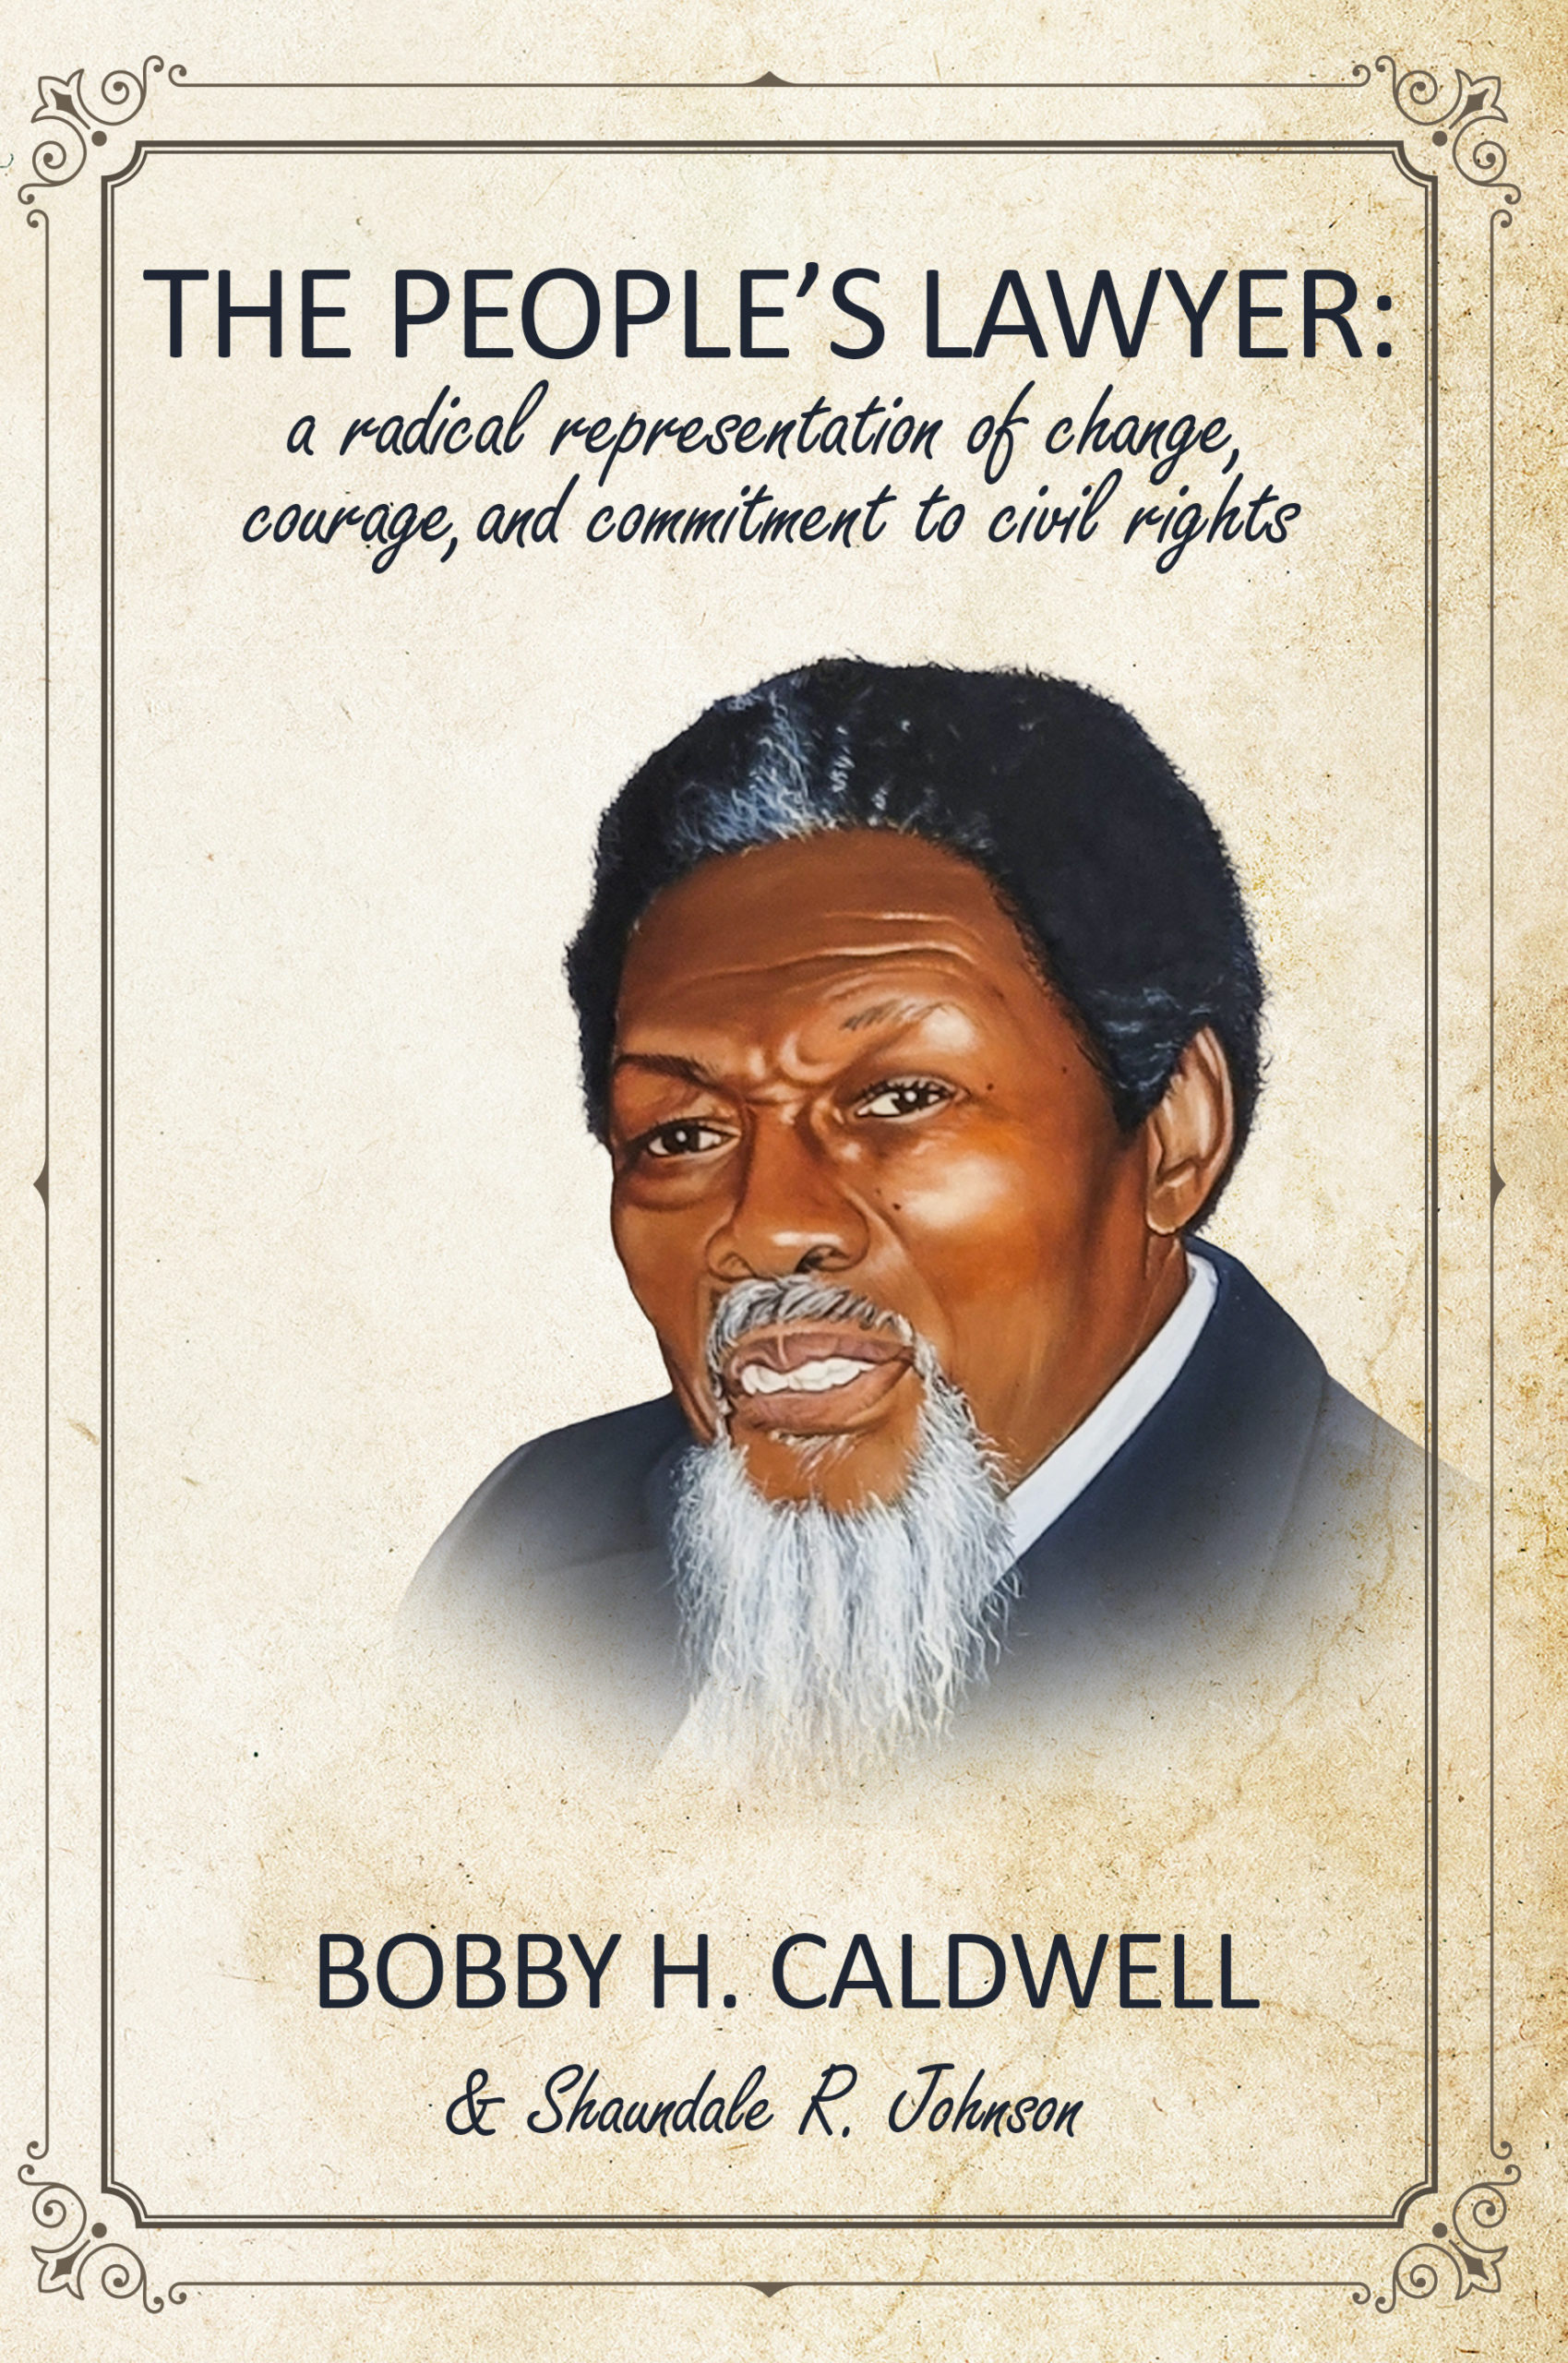 The People’s Lawyer: A Radical Representation of Change, Courage and Commitment to Civil Rights by Bobby H. Caldwell